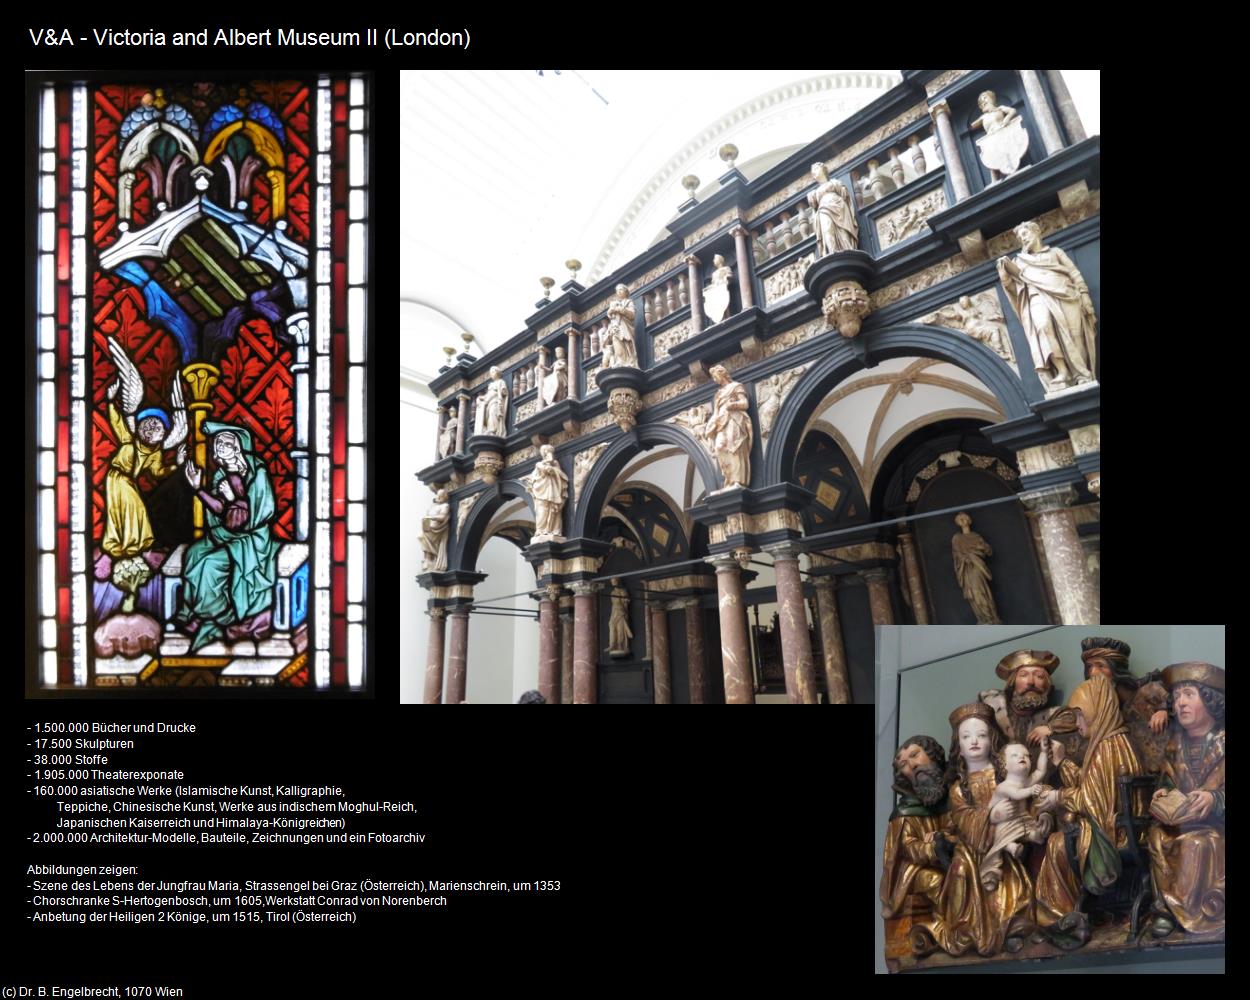 V&A - Victoria and Albert Museum II (London, England) in Kulturatlas-ENGLAND und WALES